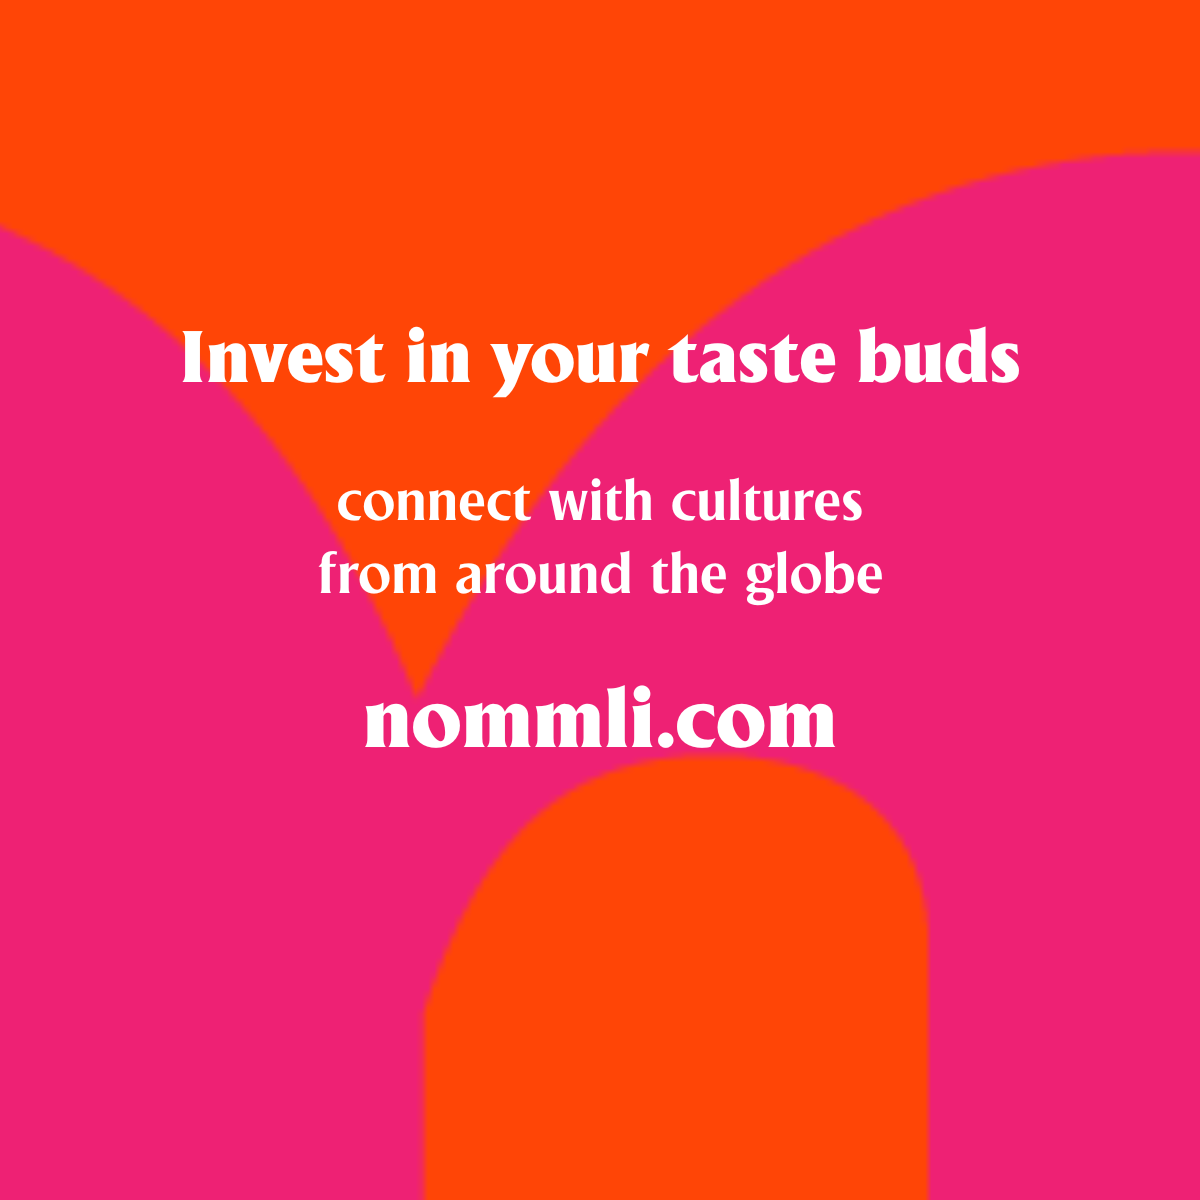 Nommli is your global cuisine ethnic meal kit food delivery service